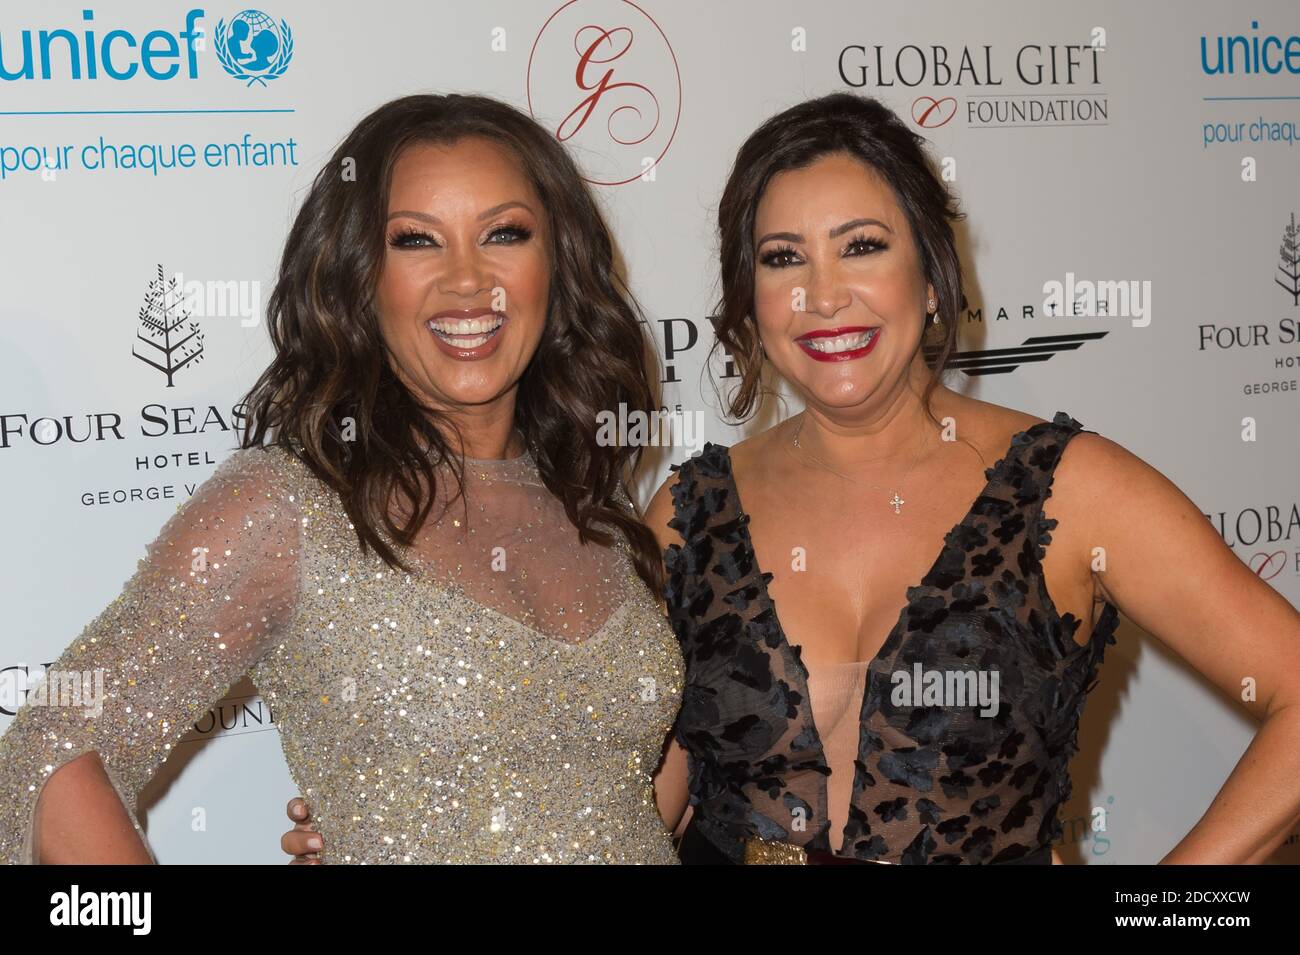 Vanessa Lynn Williams and Maria Bravo attending the Global Gift Gala in aid of Unicef France and Global Gift Foundation at Seasons Hotel George V in Paris, France on april 25, 2018 . Photo by Nicolas Genin/ABACAPRESS.COM Stock Photo